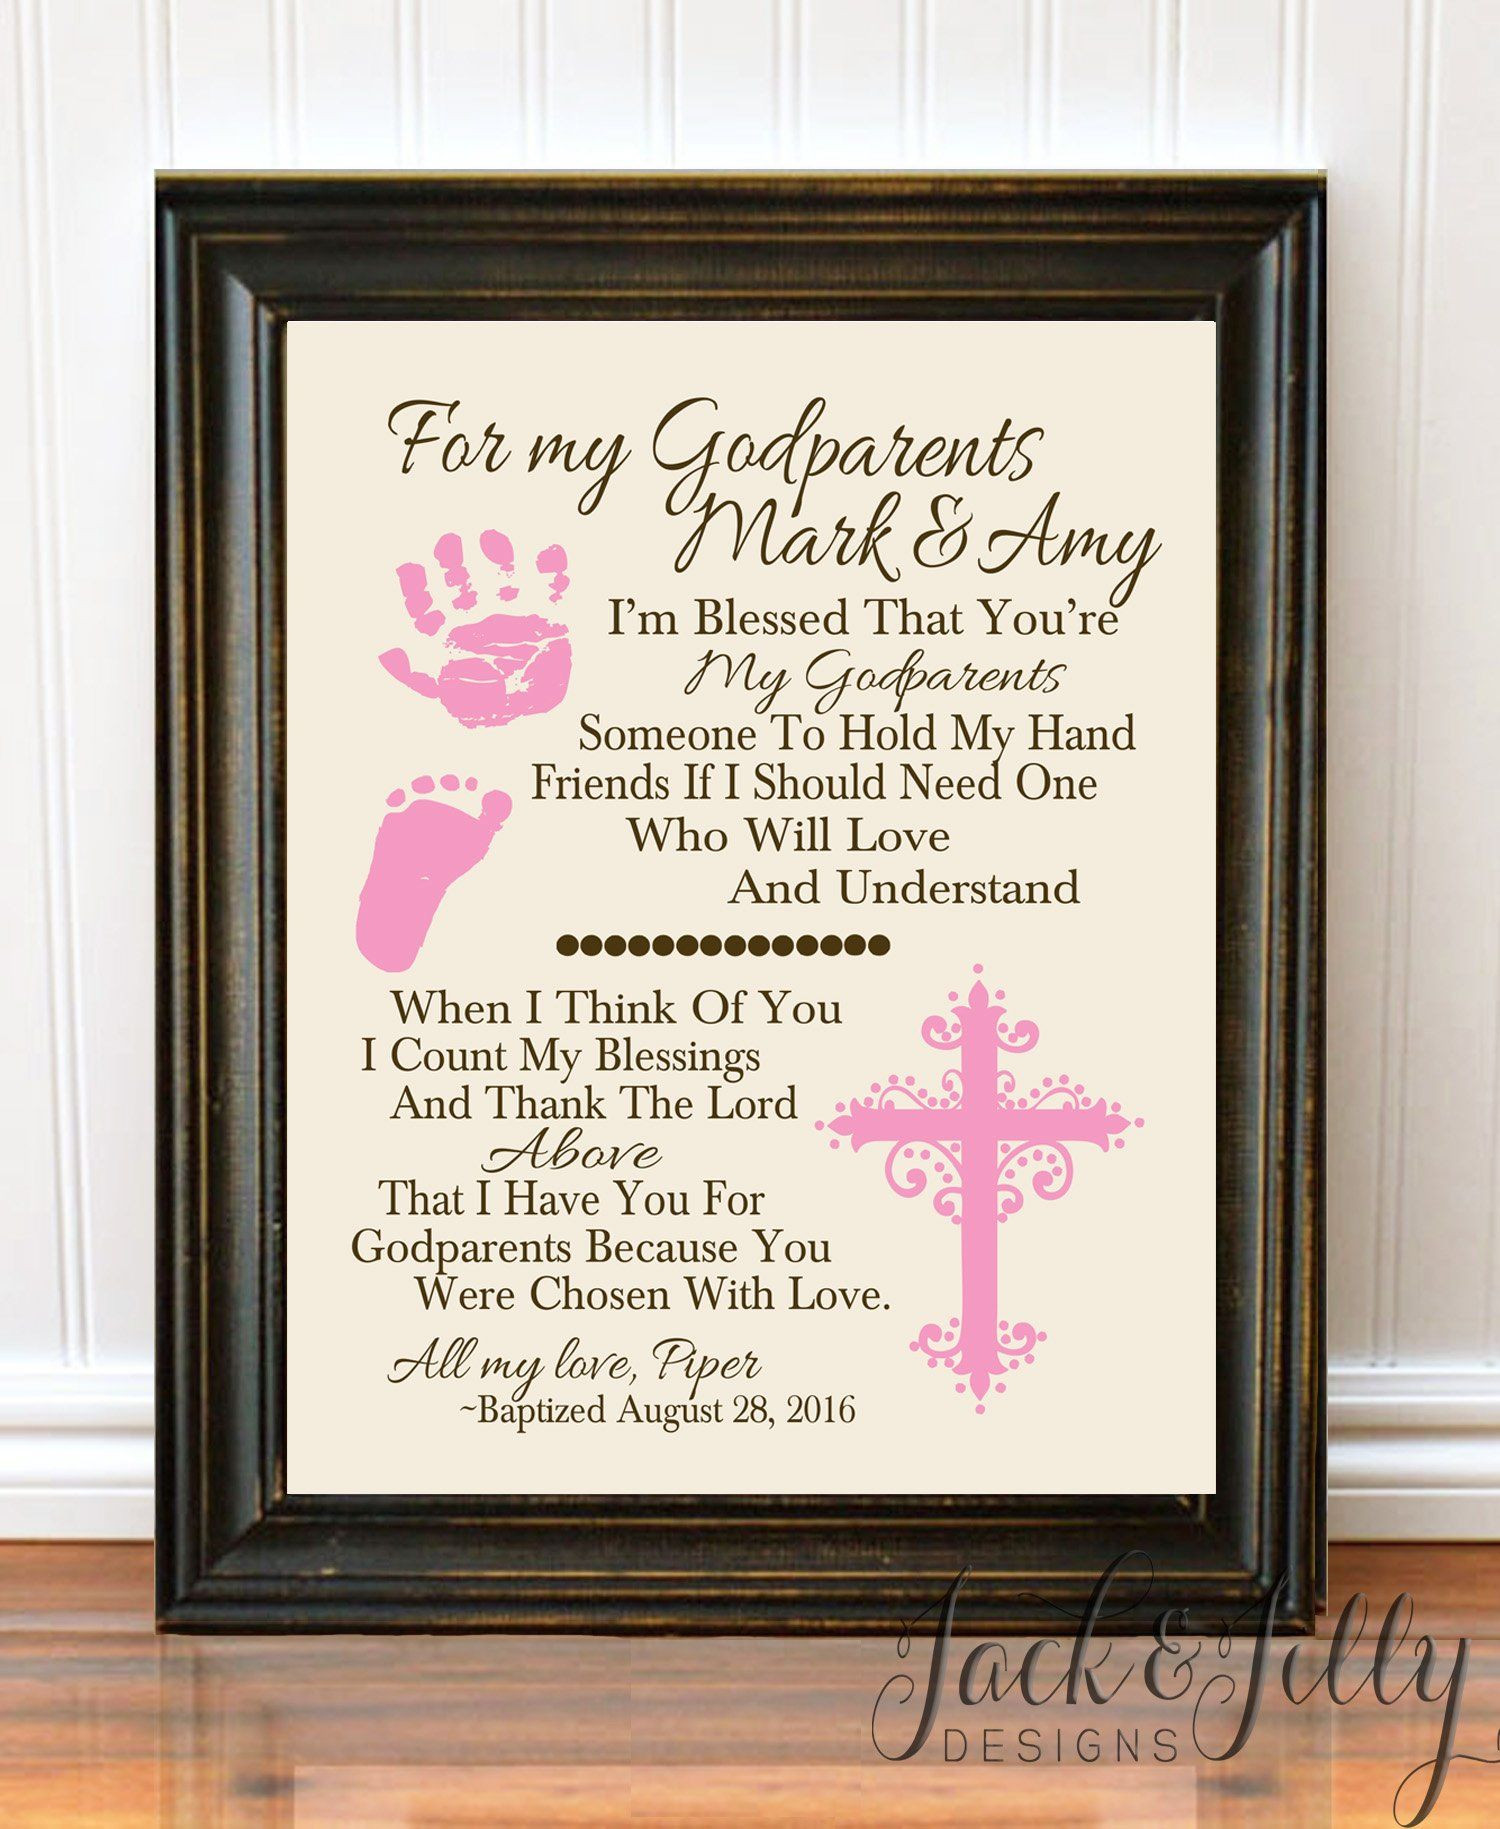 Christening Gift Ideas From Godmother
 PERSONALIZED GODPARENT PRINT Godparent Gift Godmother